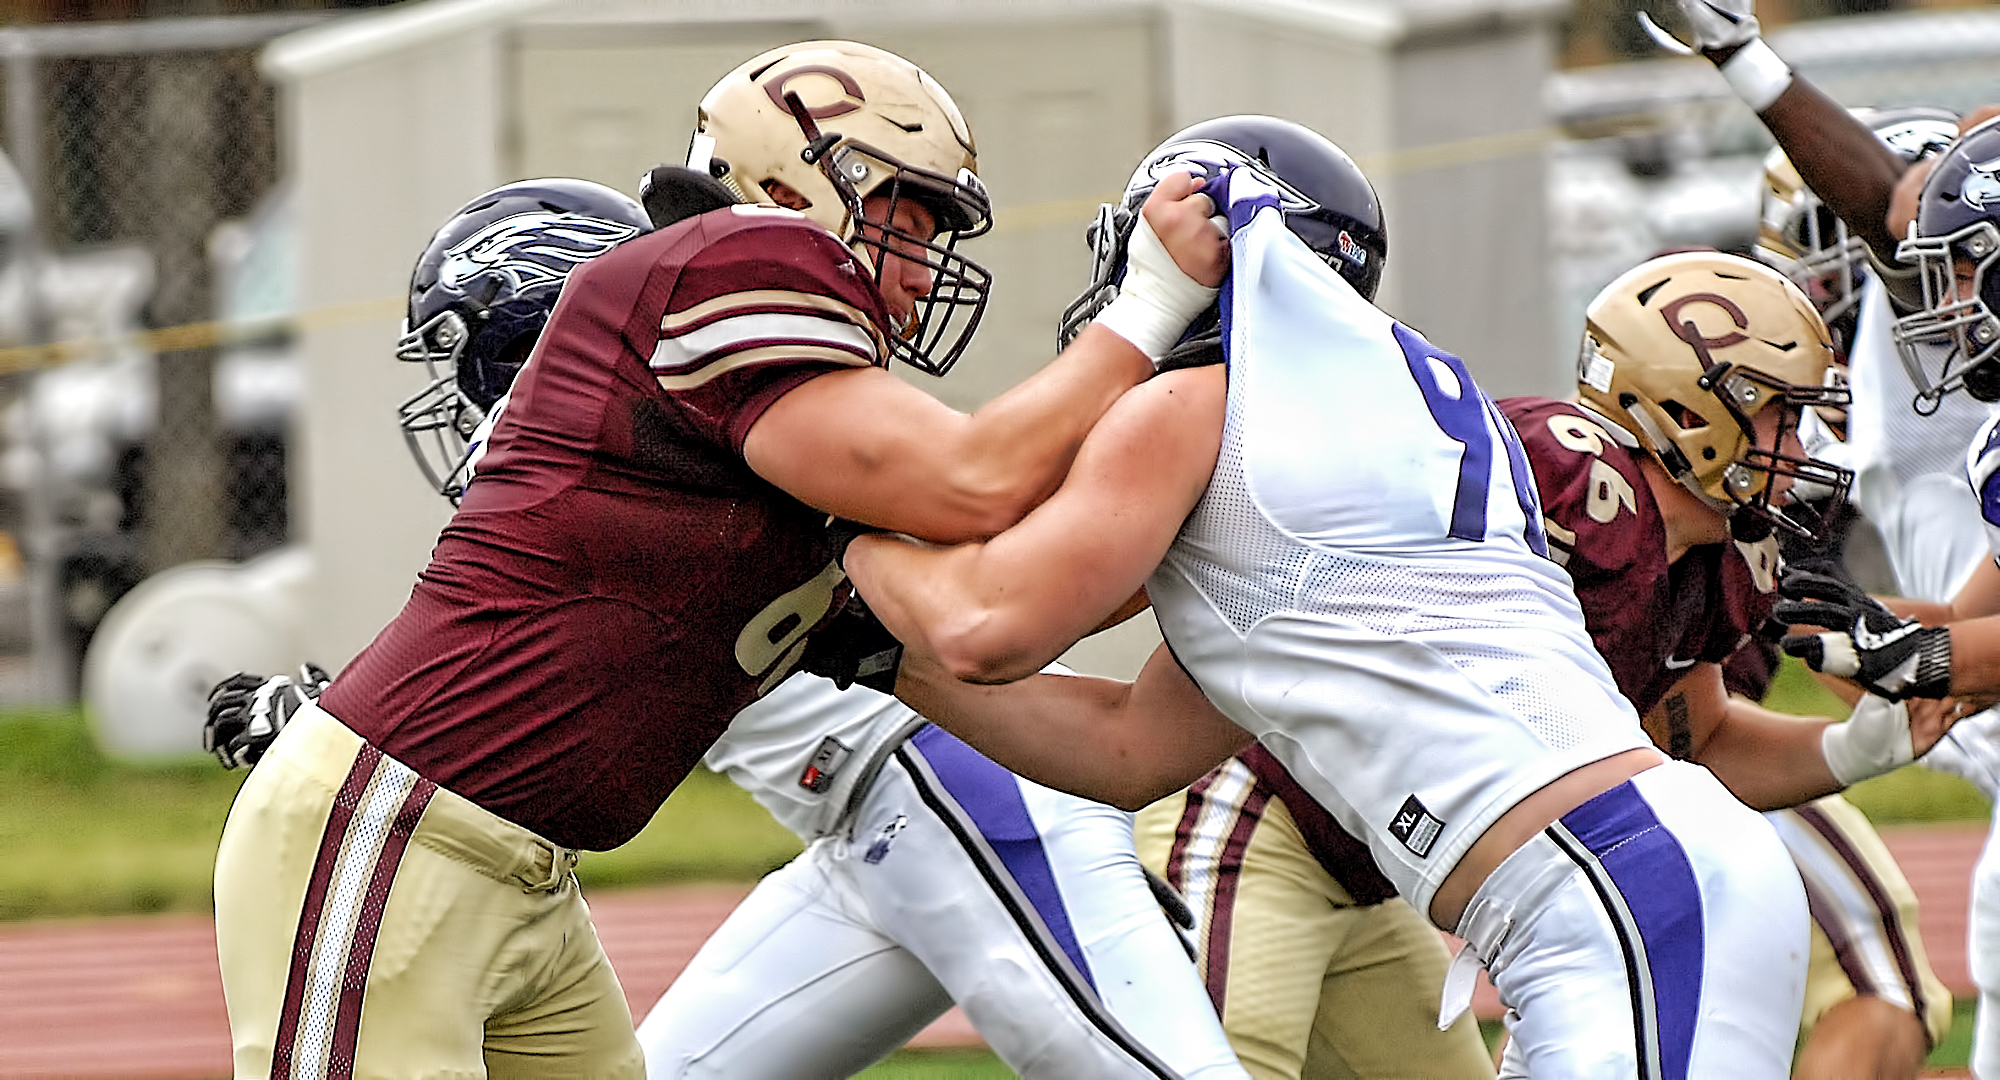 Hans Solberg has blossomed into of the the best lineman in the MIAC.